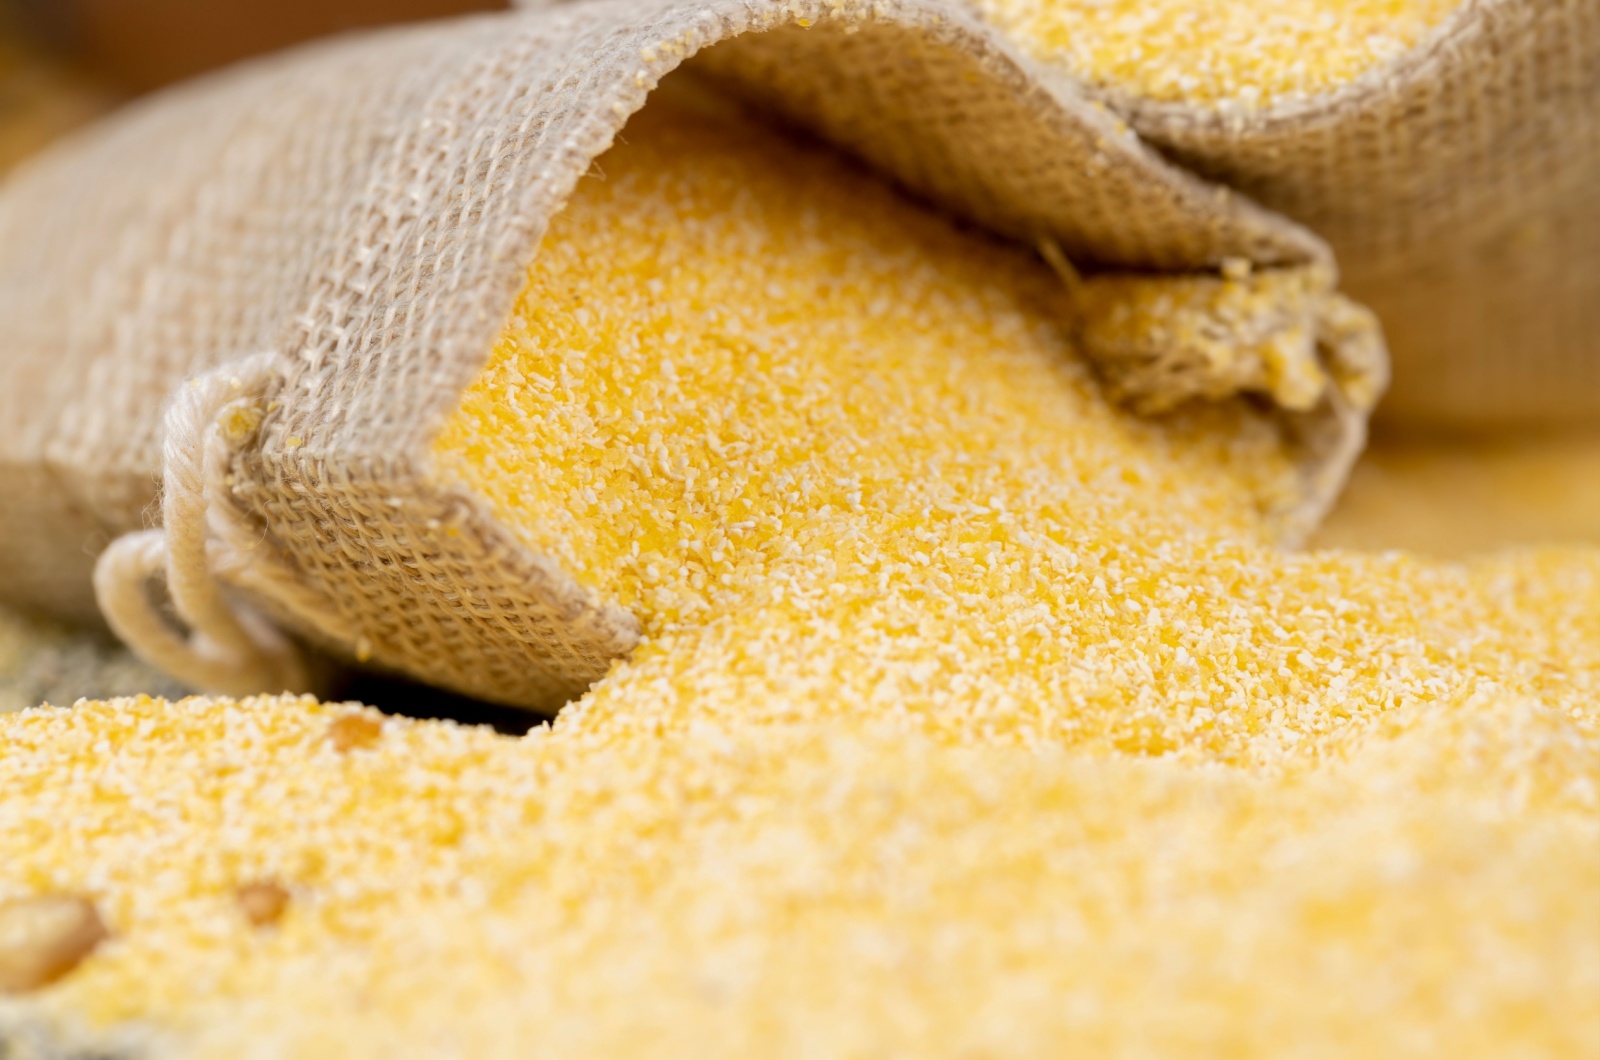 cornmeal spilling out of a bag